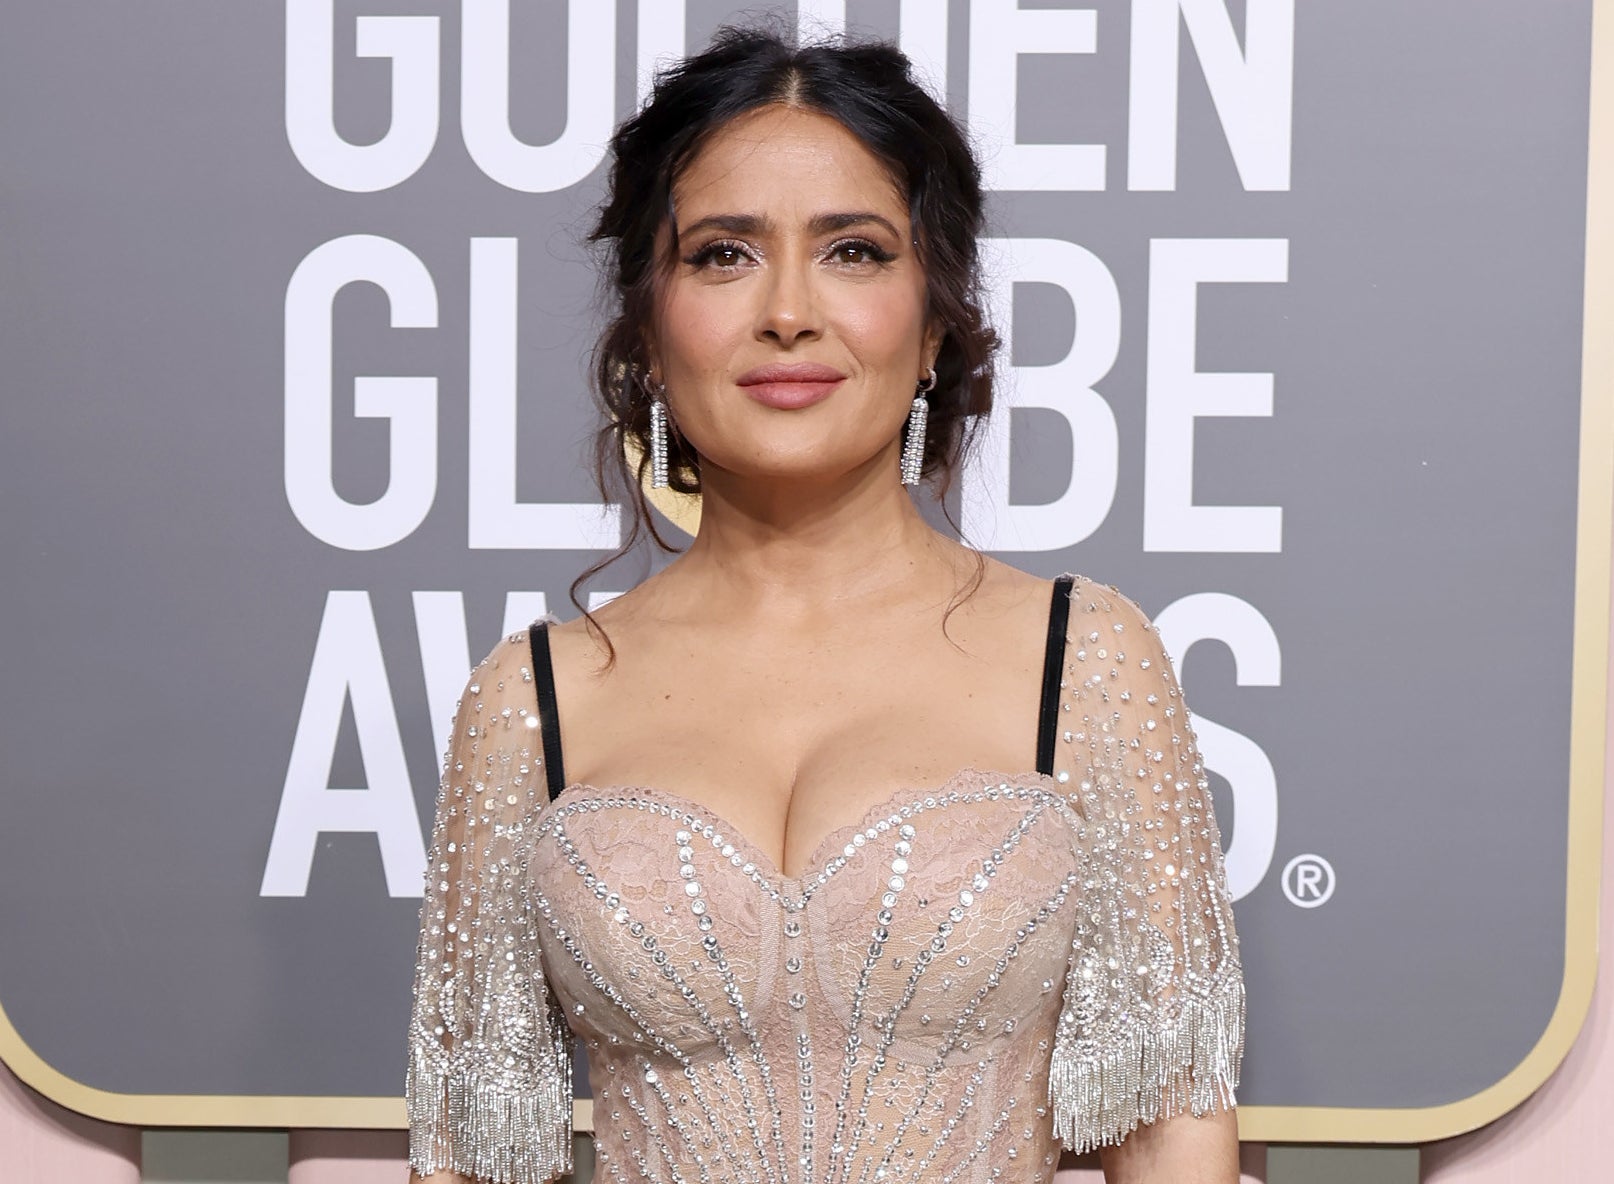 A close-up of Salma in a sparkly, low-cut outfit